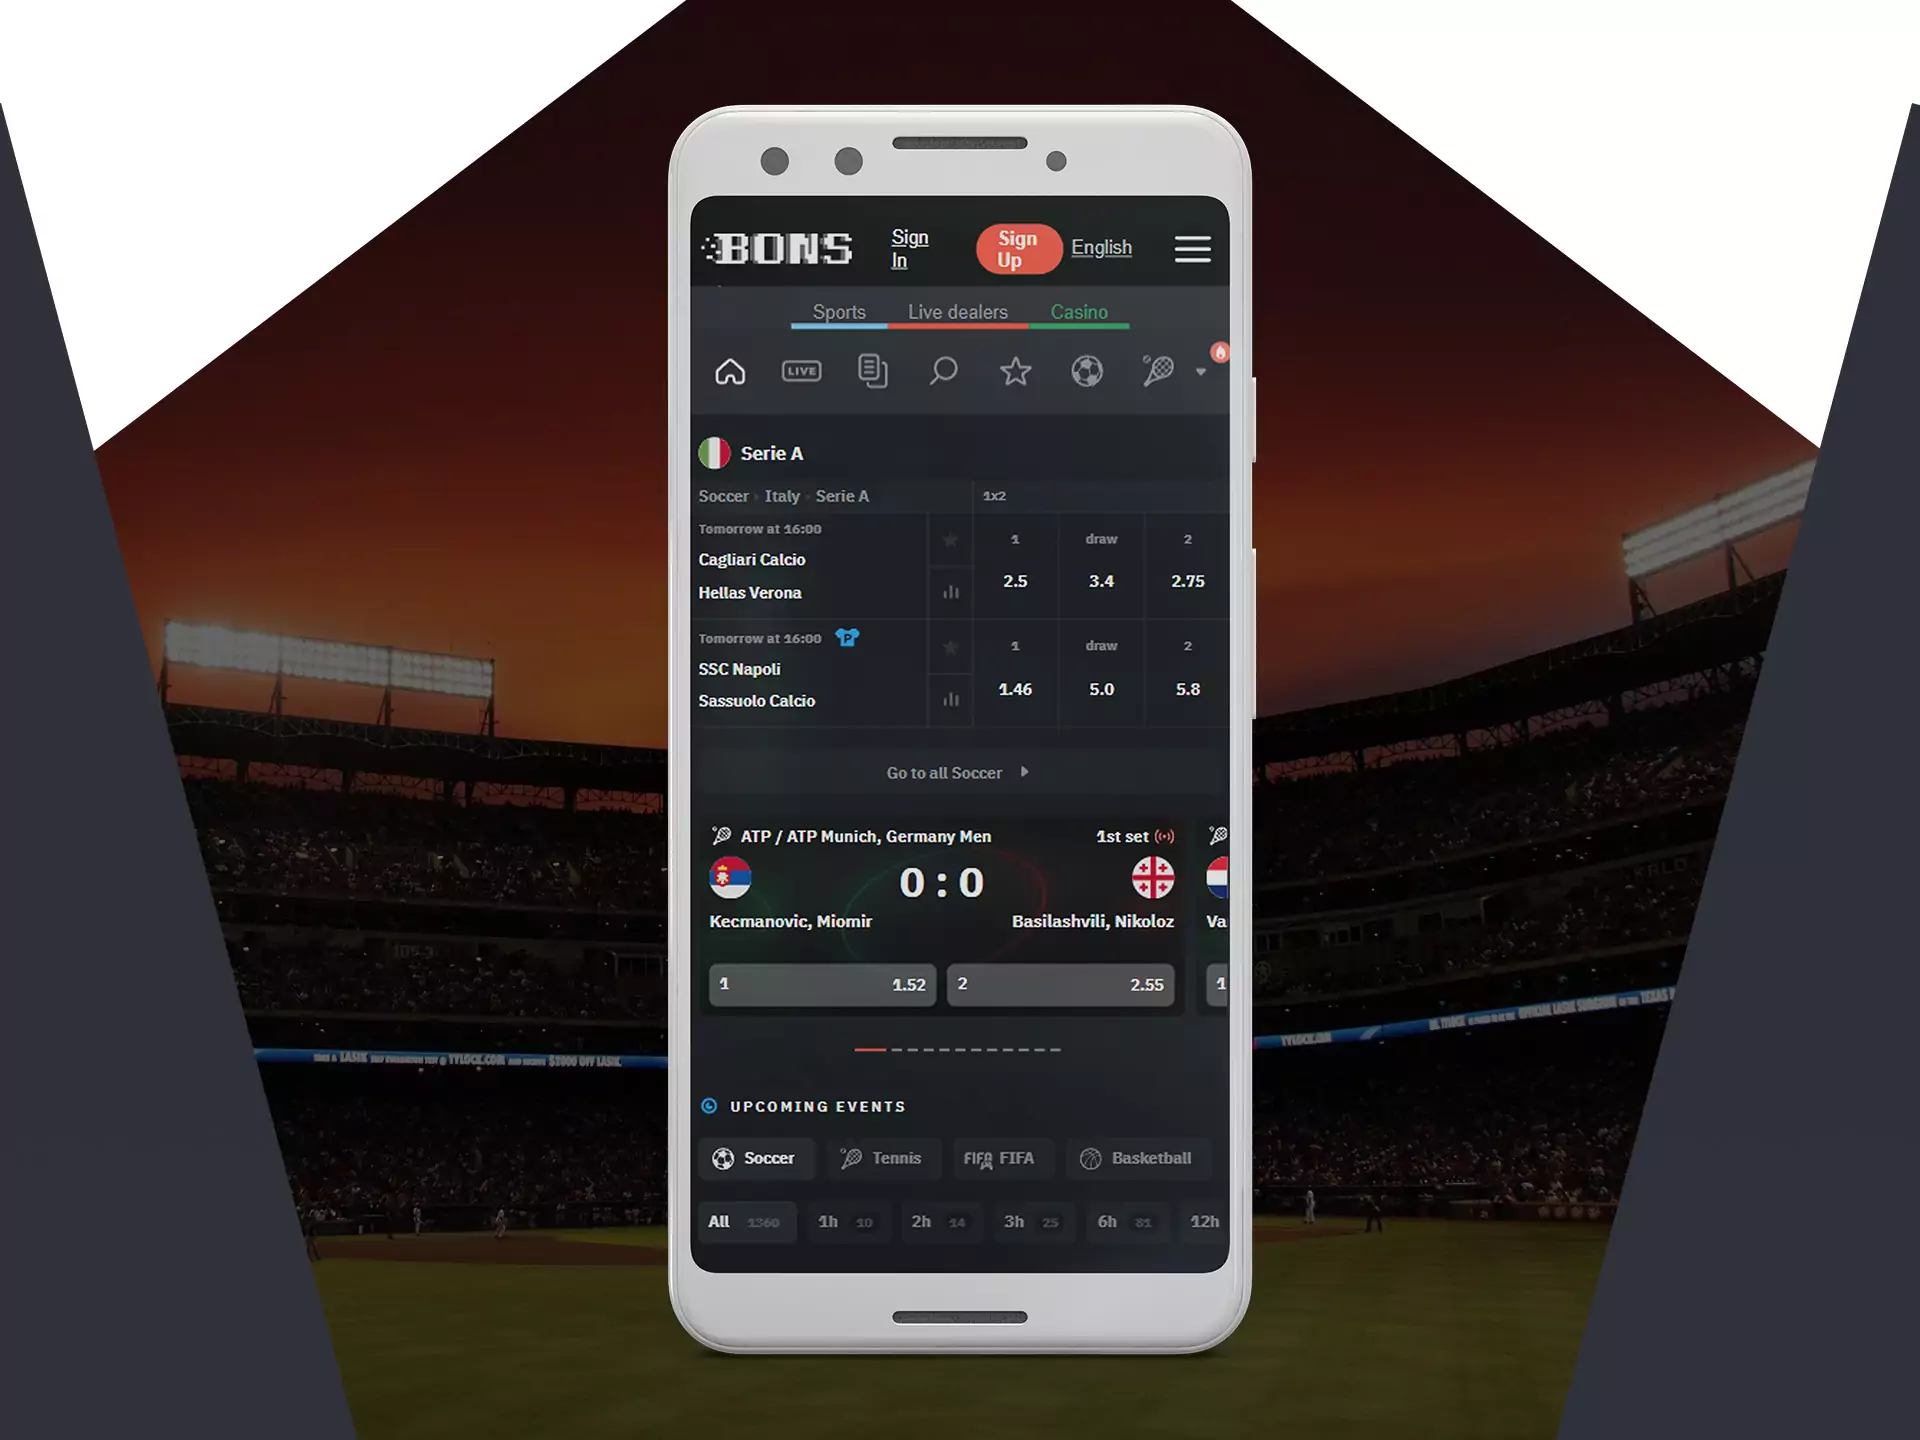 The Bons app supports betting on cricket and other sports